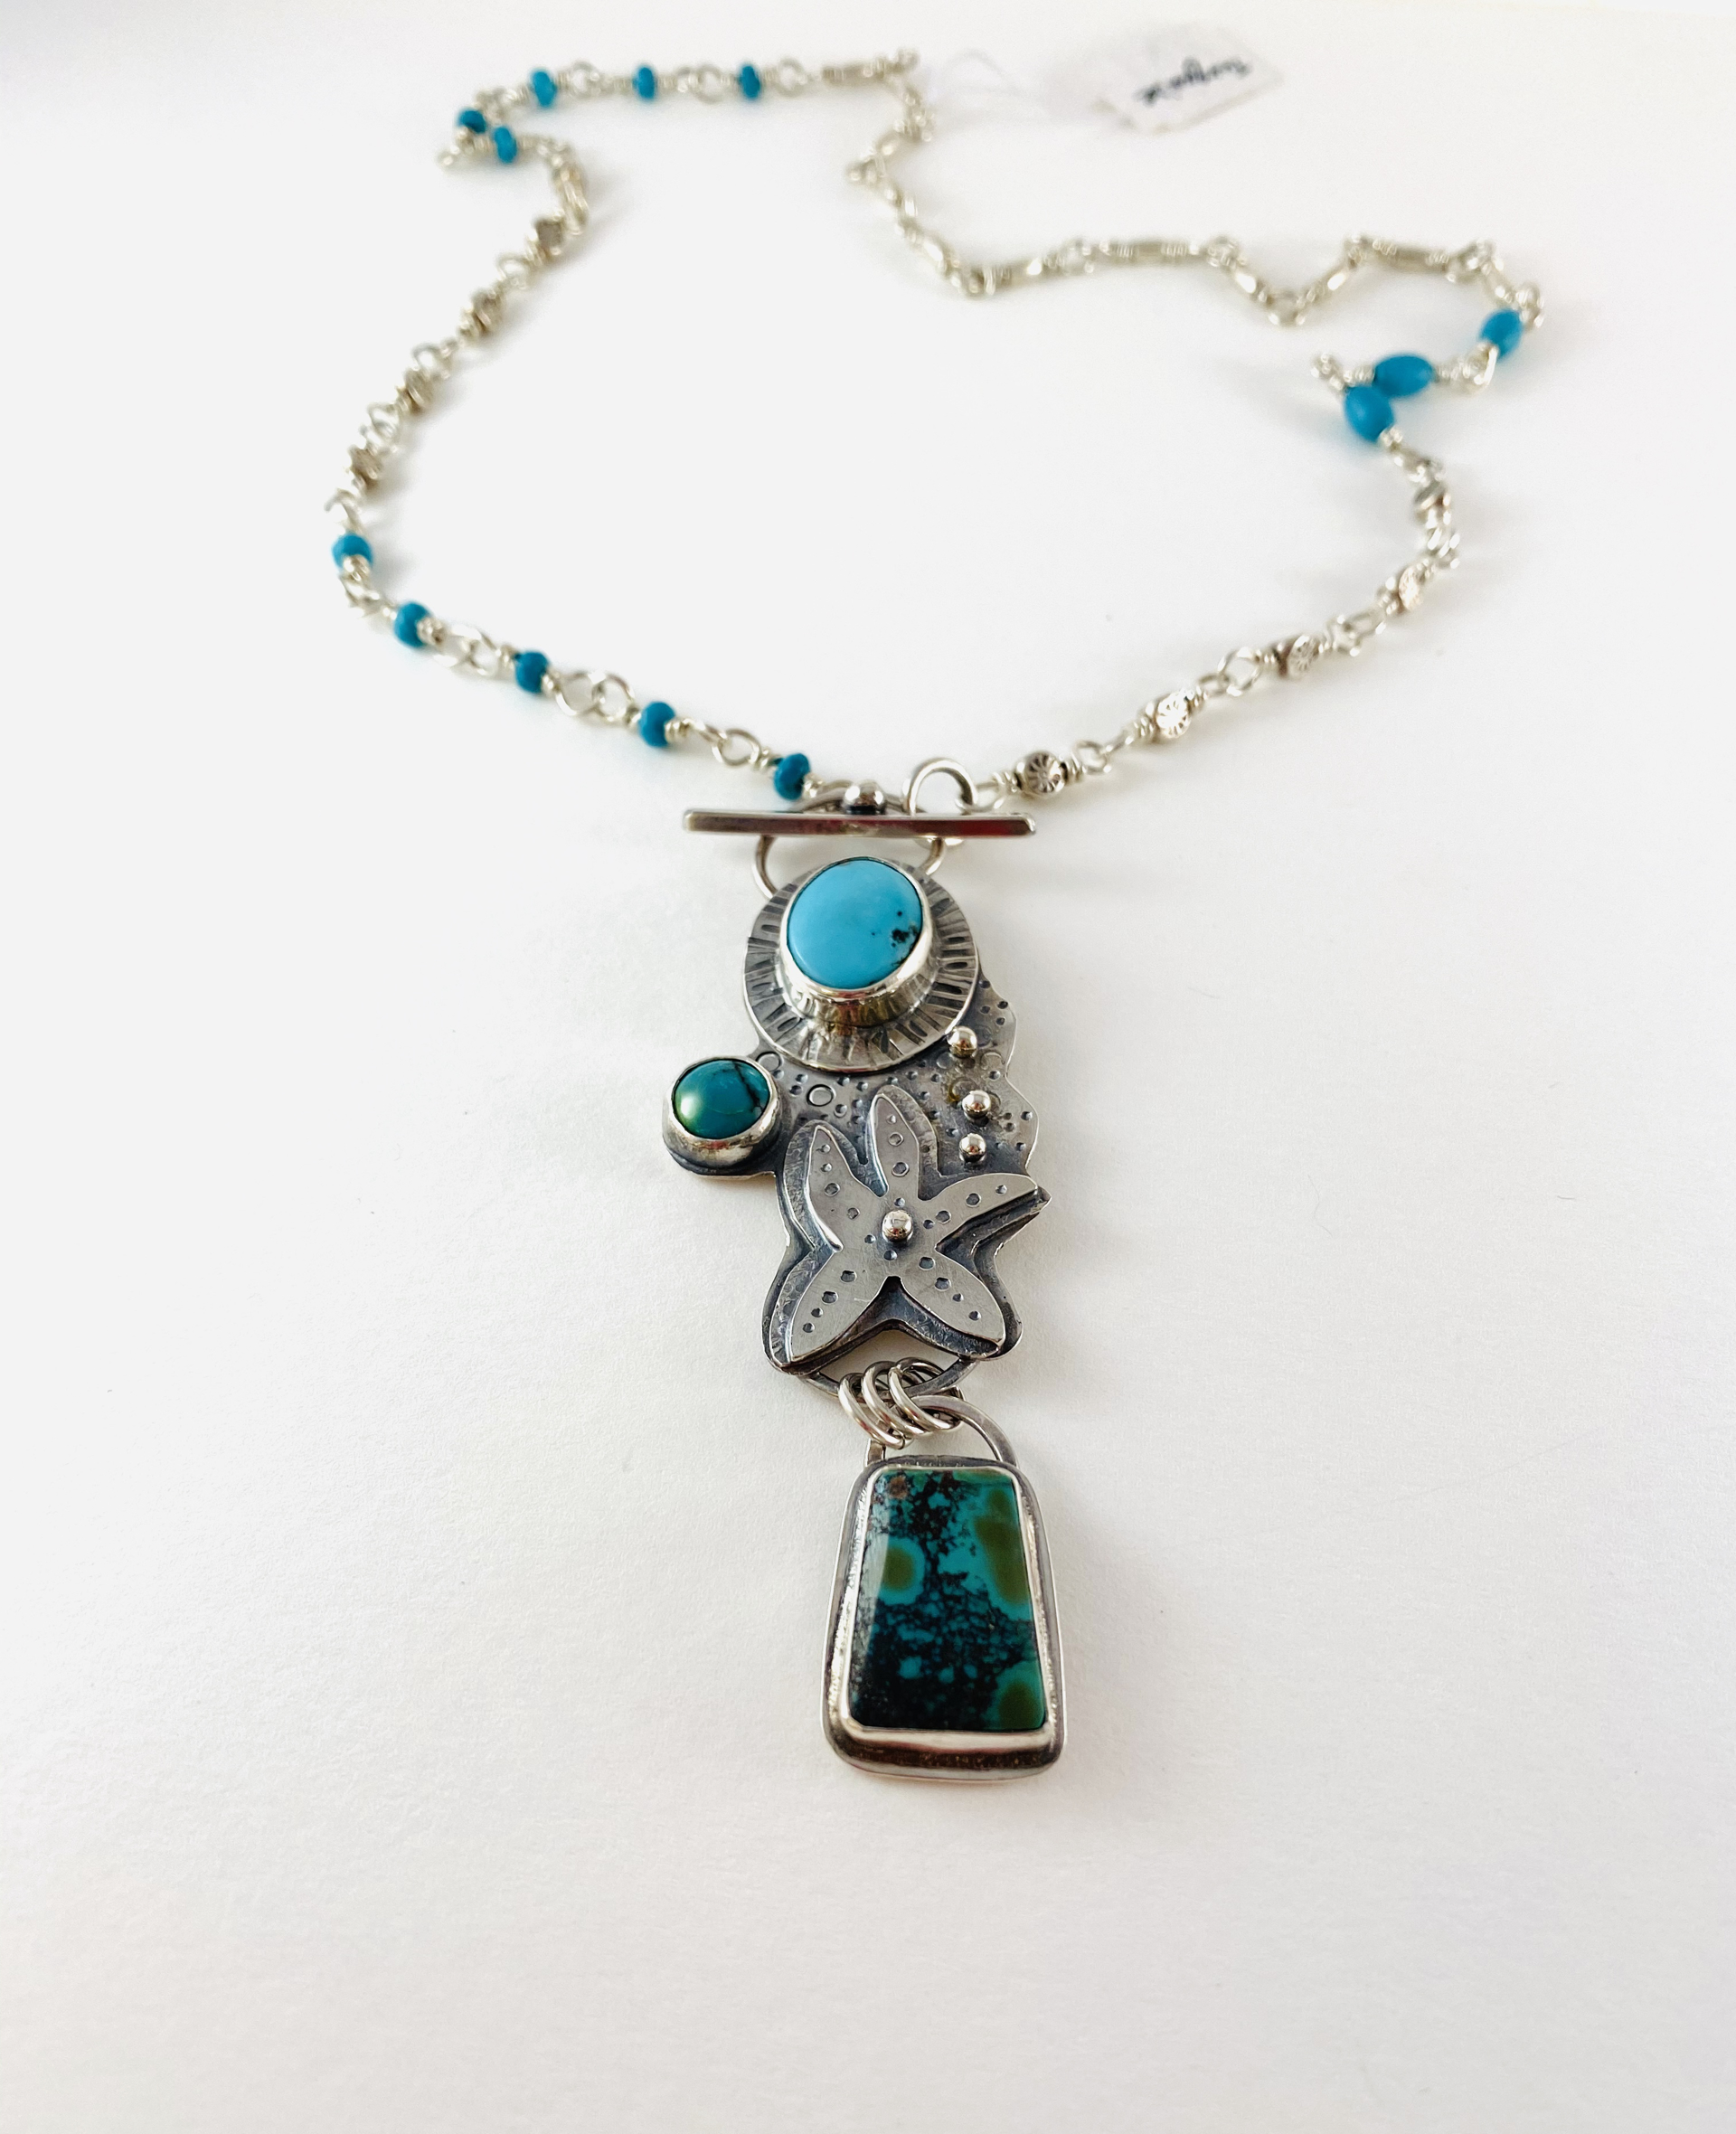 Starfish and Turquoise Pendant, Silver and Turquoise Bead Chain Necklace AB20-40 by Anne Bivens